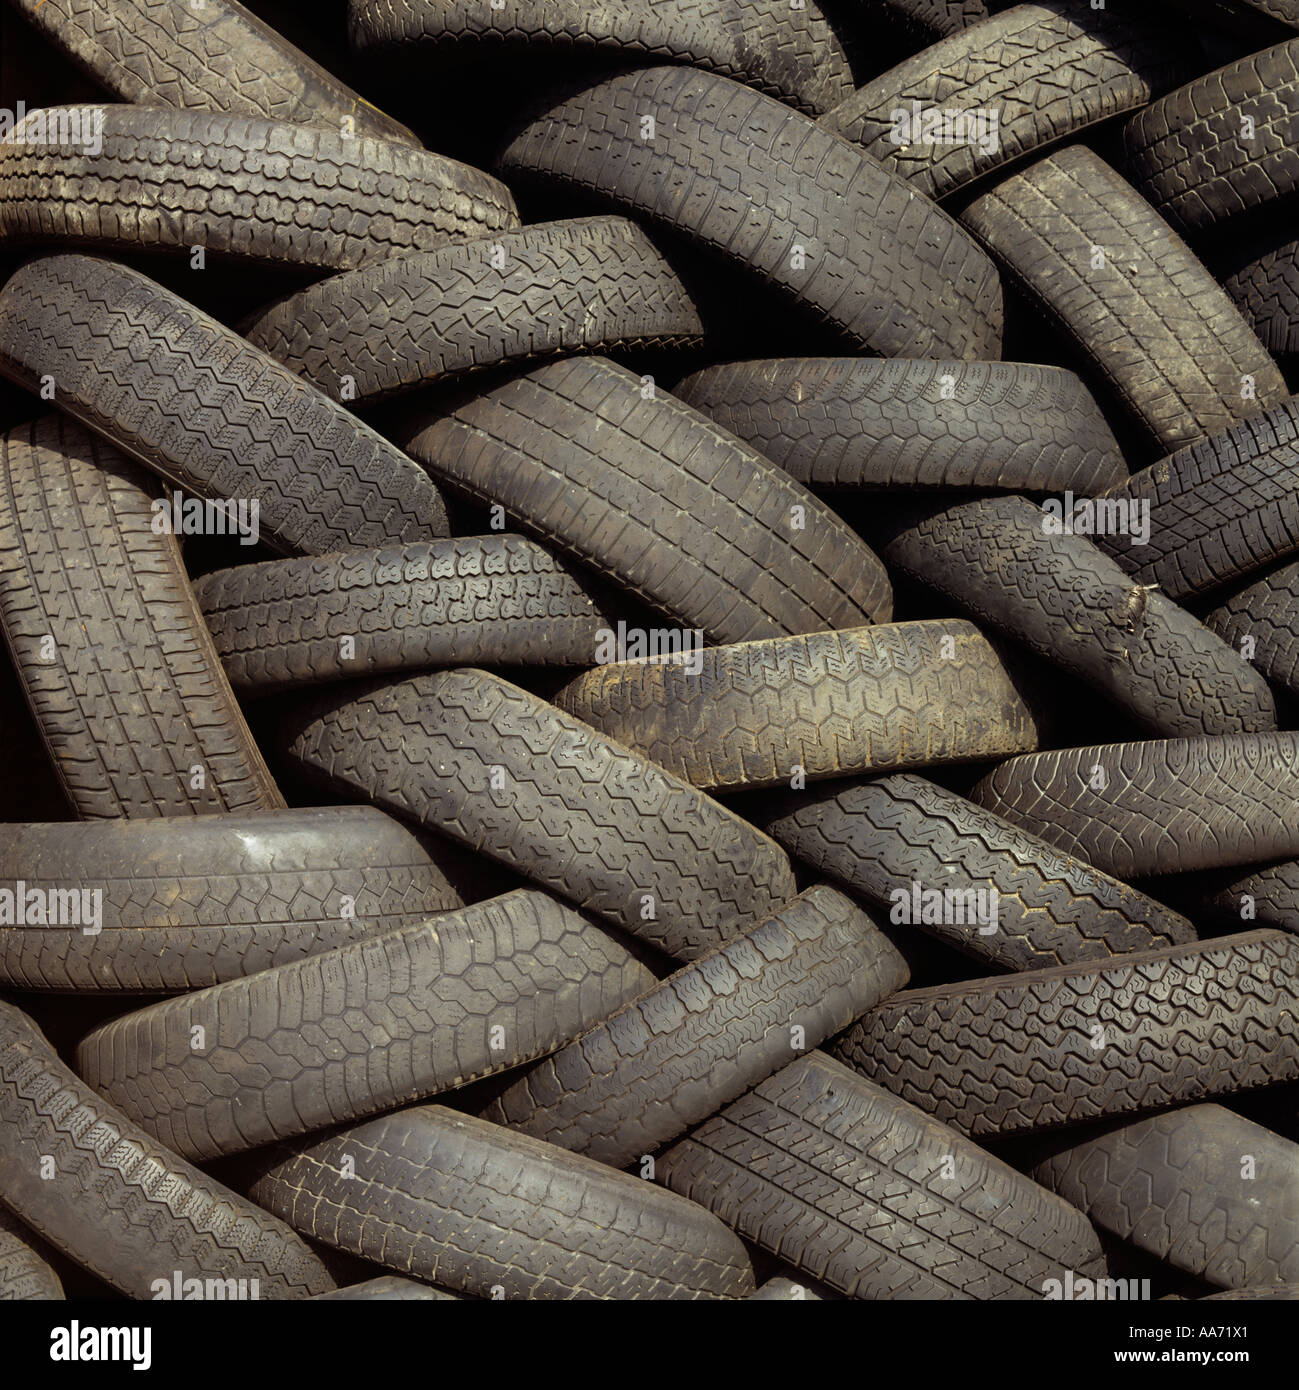 Rubber motor vehicle tyres stacked at a waste transfer station before being recycled Stock Photo